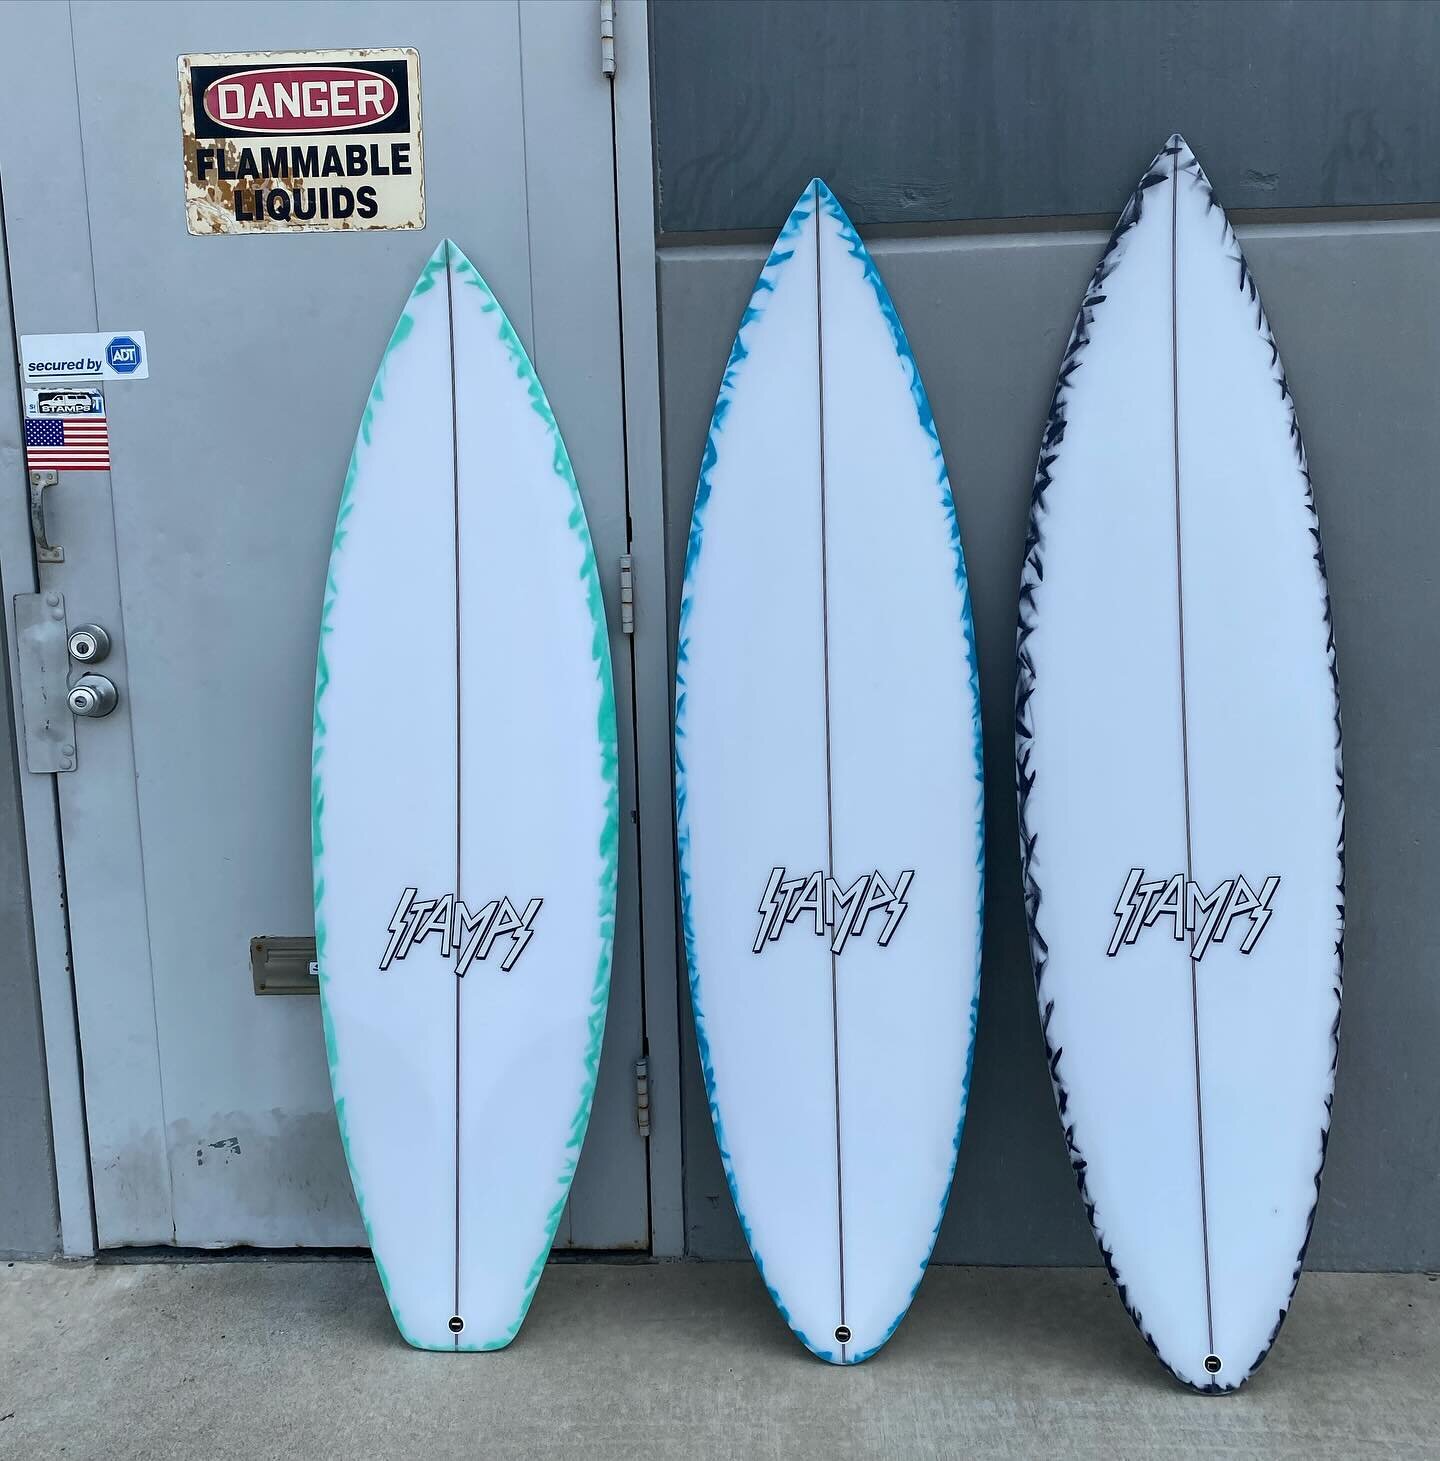 :: three pack with a whimsical, loose paint scheme for @baileyturner_hb :: 5&rsquo;3.5&rdquo; for the everyday hb :: 5&rsquo;6&rdquo; for the next step :: 5&rsquo;8&rdquo; traveler for the reefs abroad and the more solid days around home ::